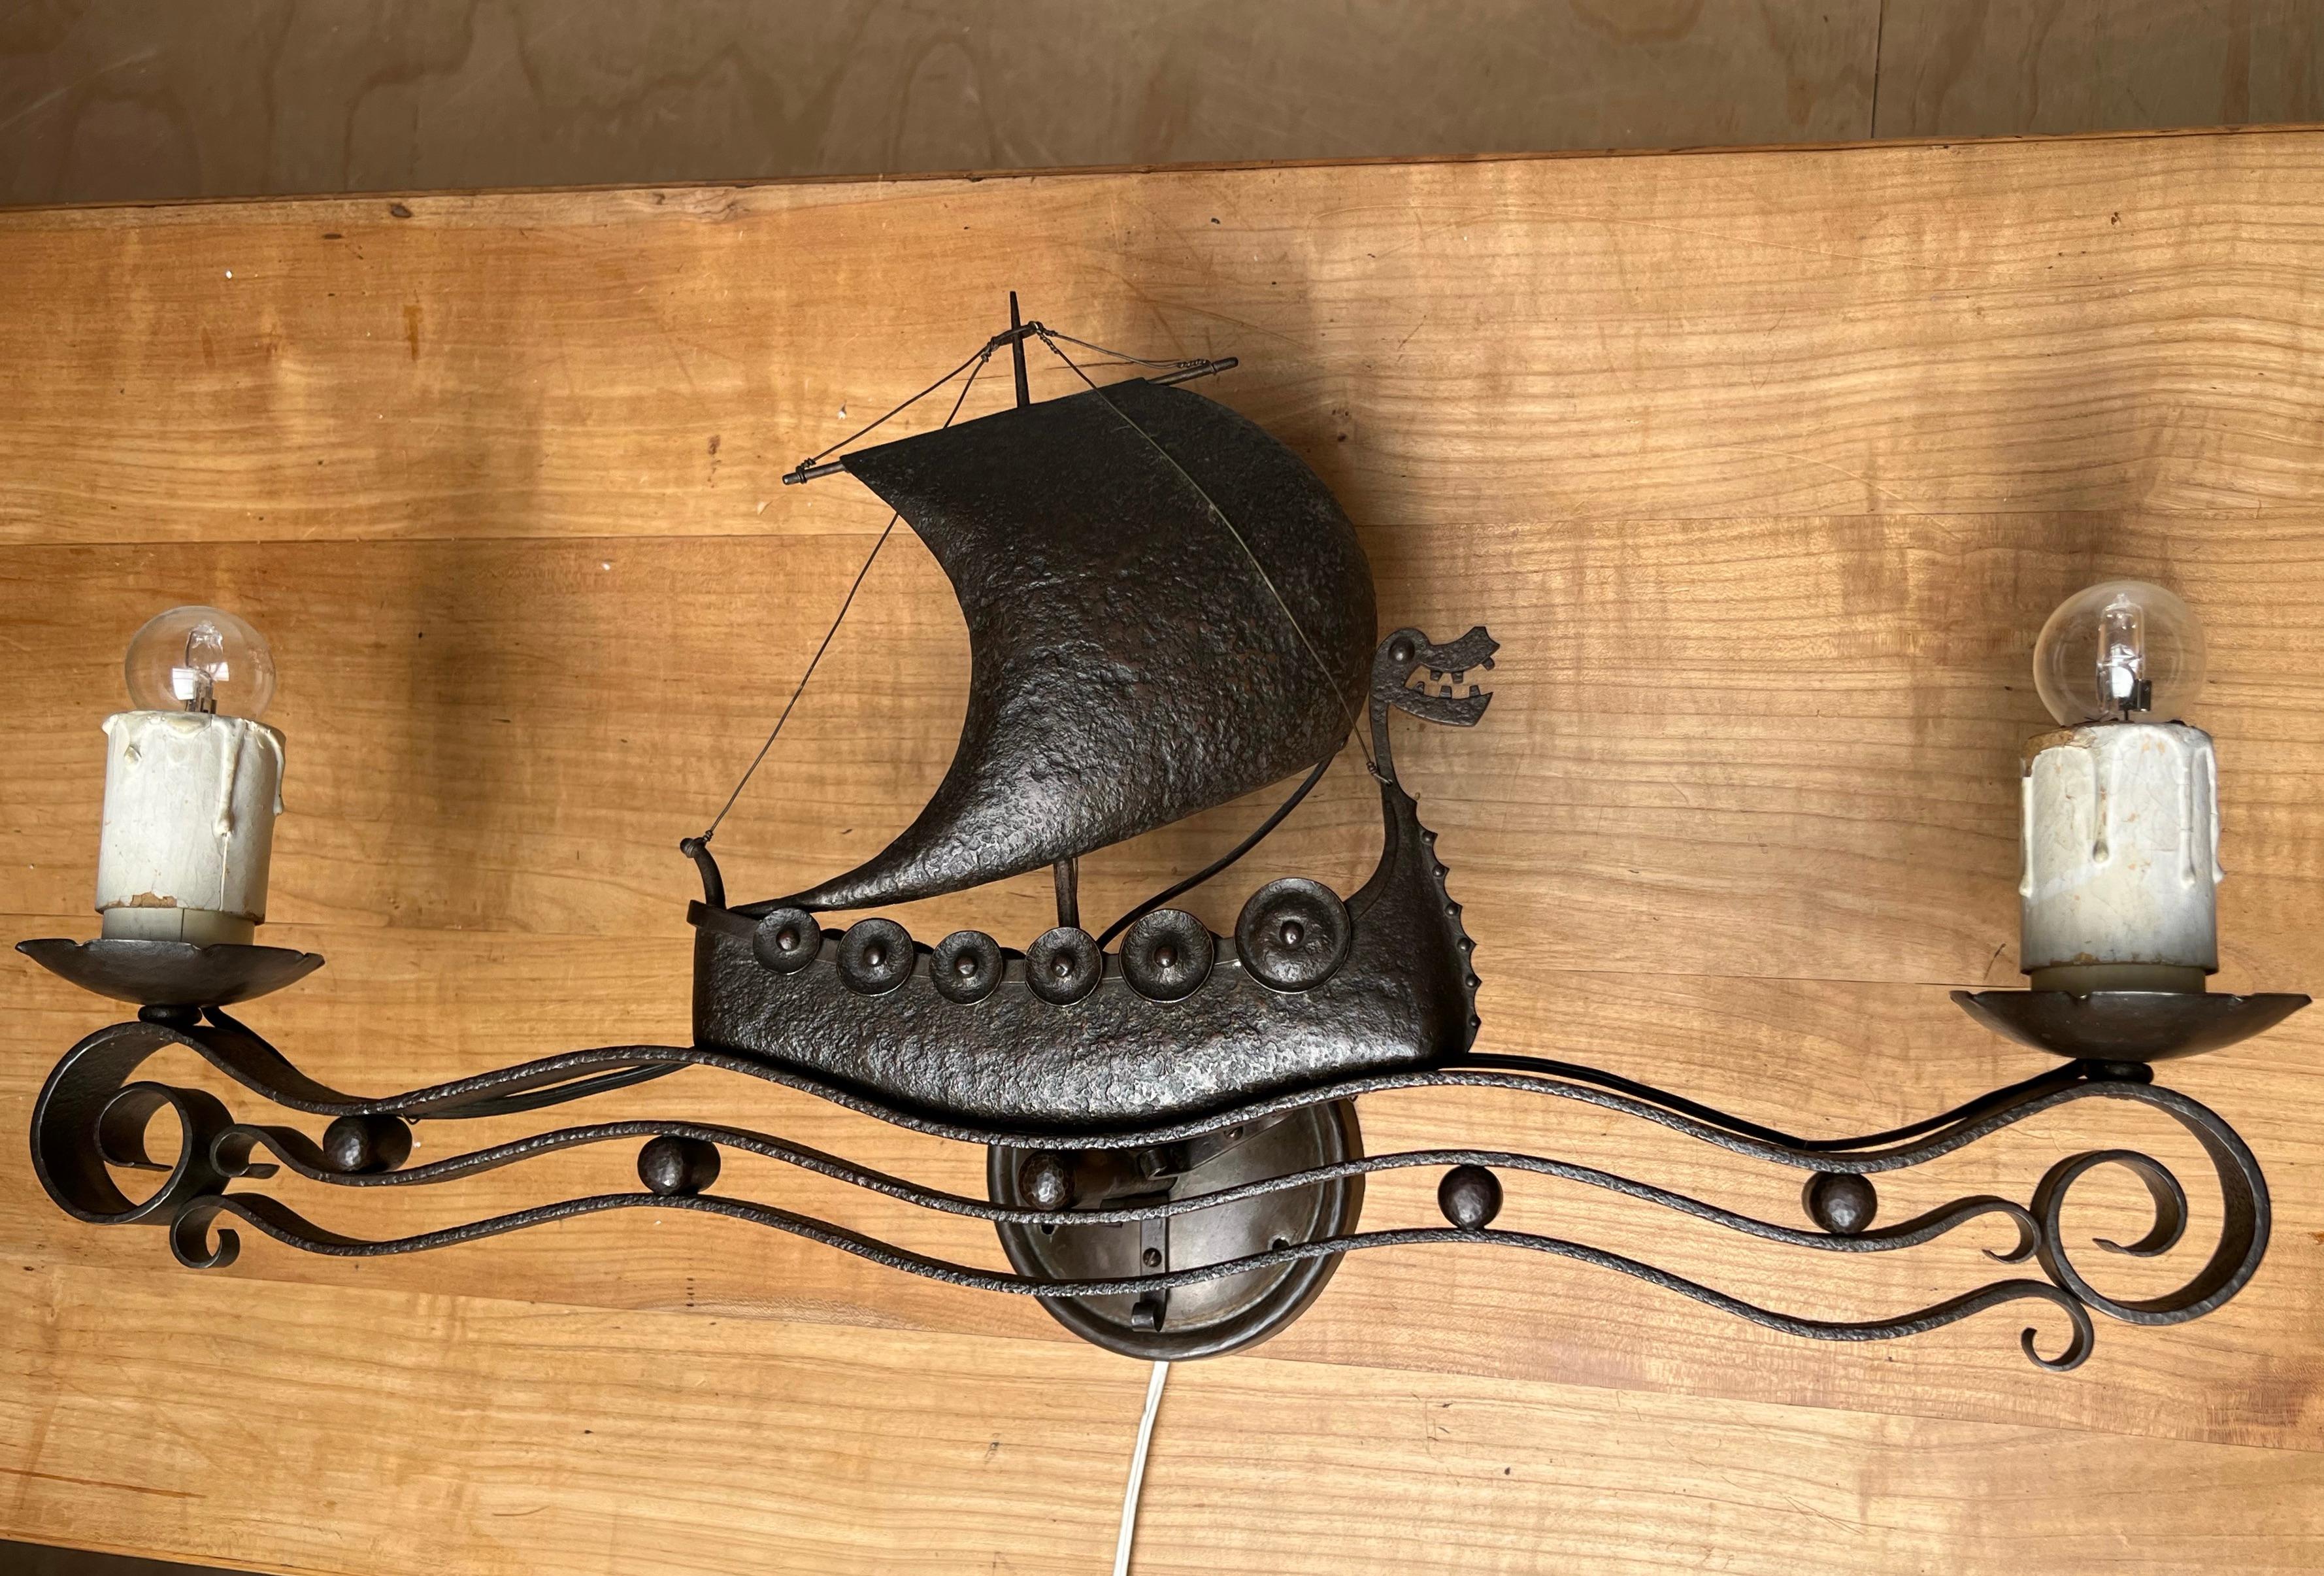 Rare and very well made Arts & Crafts work of lighting art.

If you are looking for a unique wall sconce to grace a special space then this handcrafted fixture could be perfect for you. This rare and possibly unique design is all-handcrafted out of